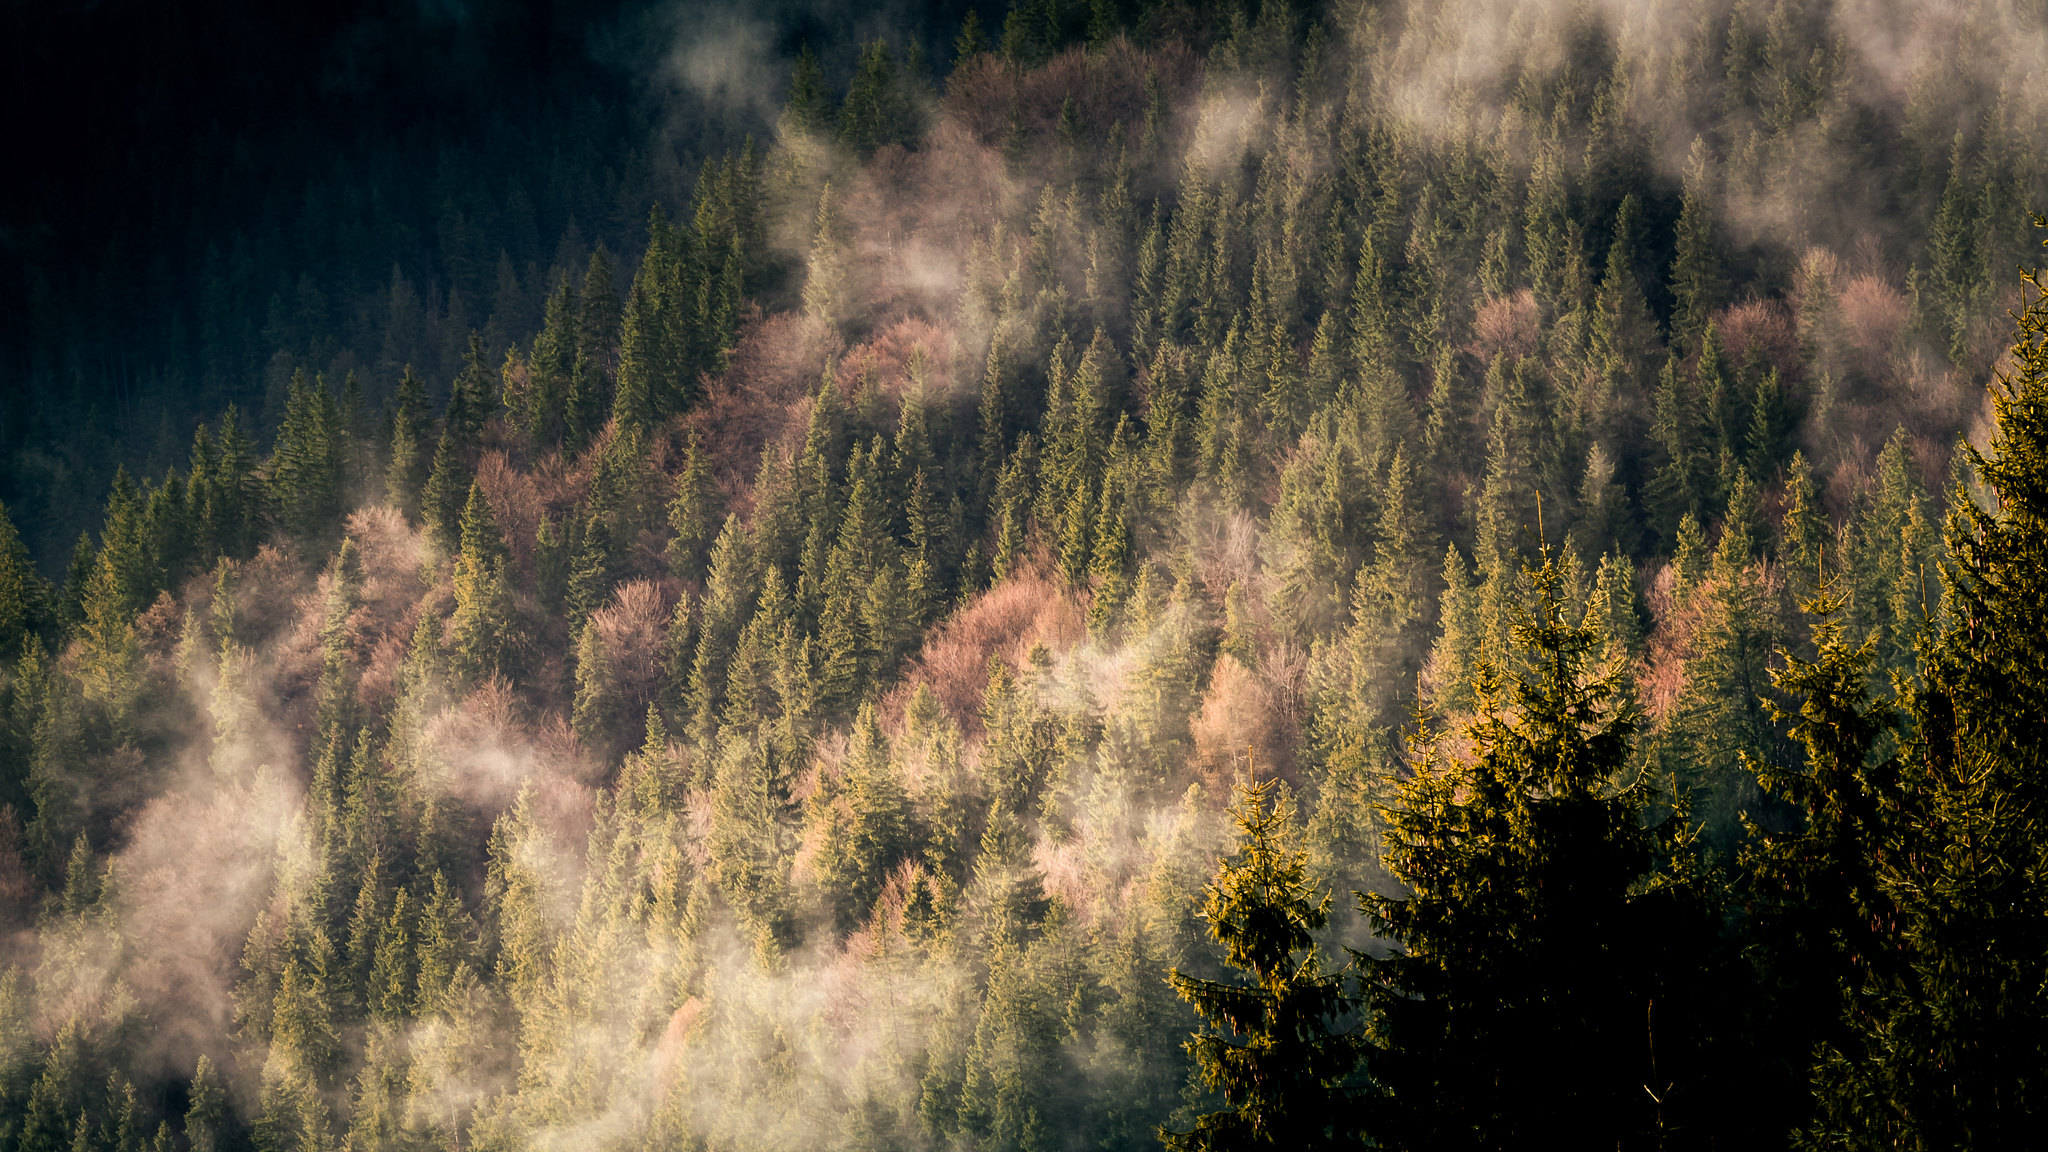 Rising mist above the forest.